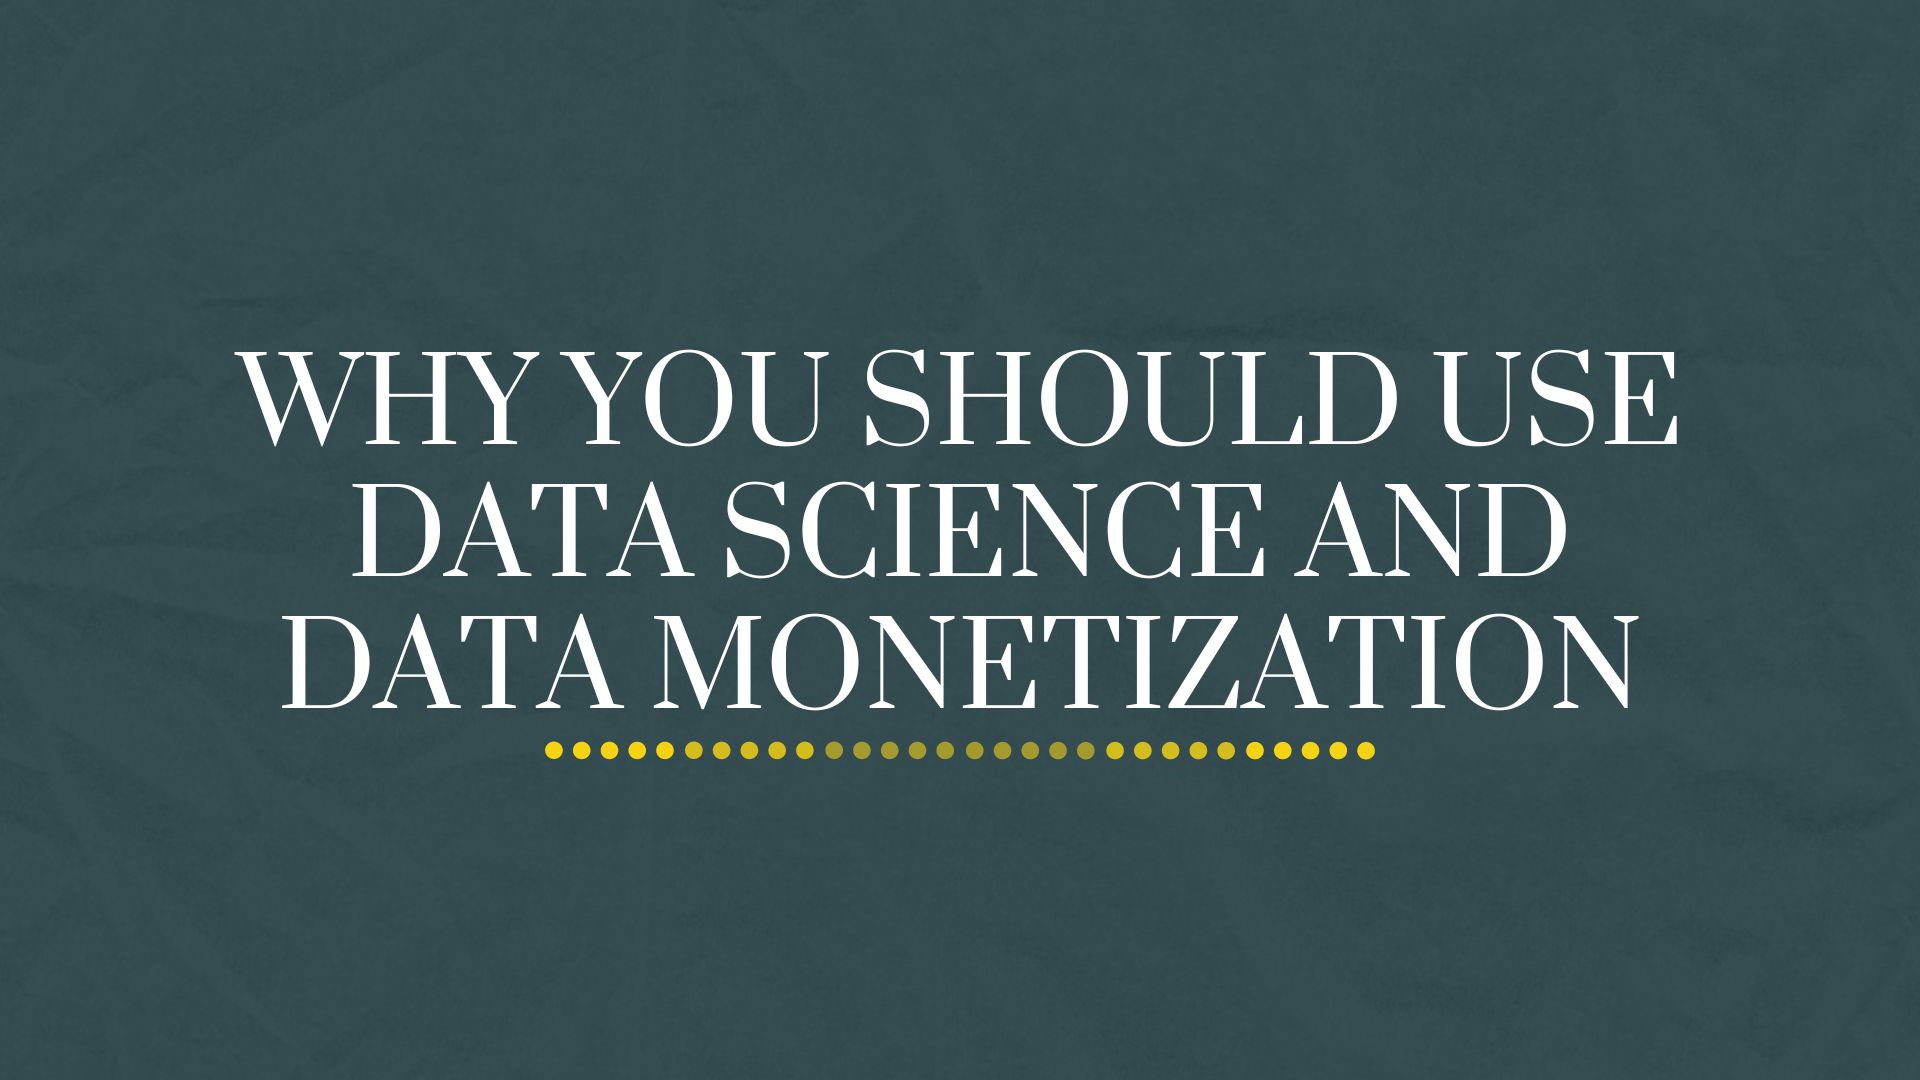 Why You Should Use Data Science and Data Monetization